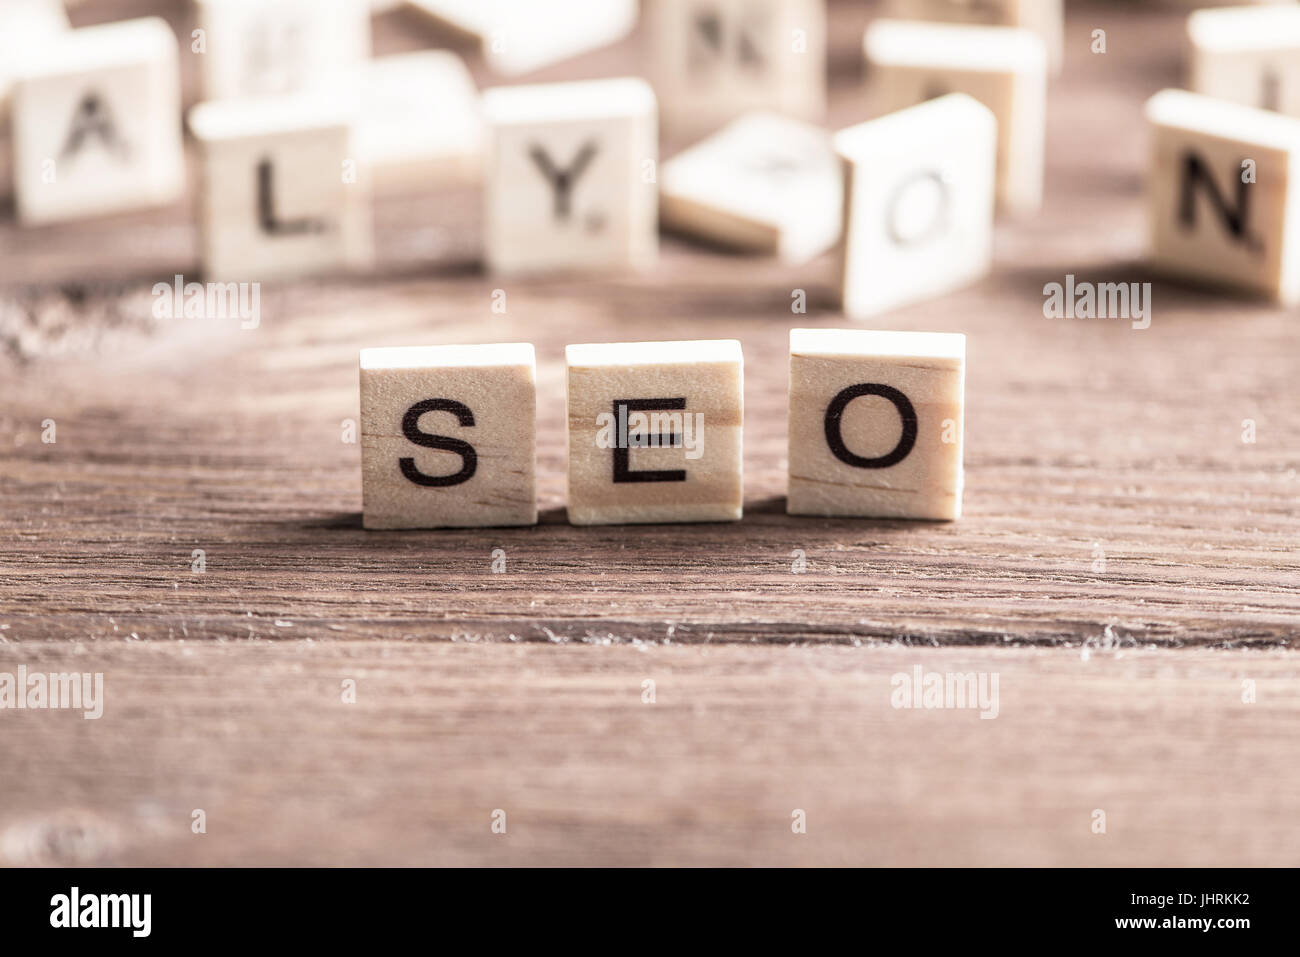 Search Engine High Resolution Stock Photography And Images Alamy Search with an image file or link to find similar images. https www alamy com stock photo search engine optimization 148652422 html